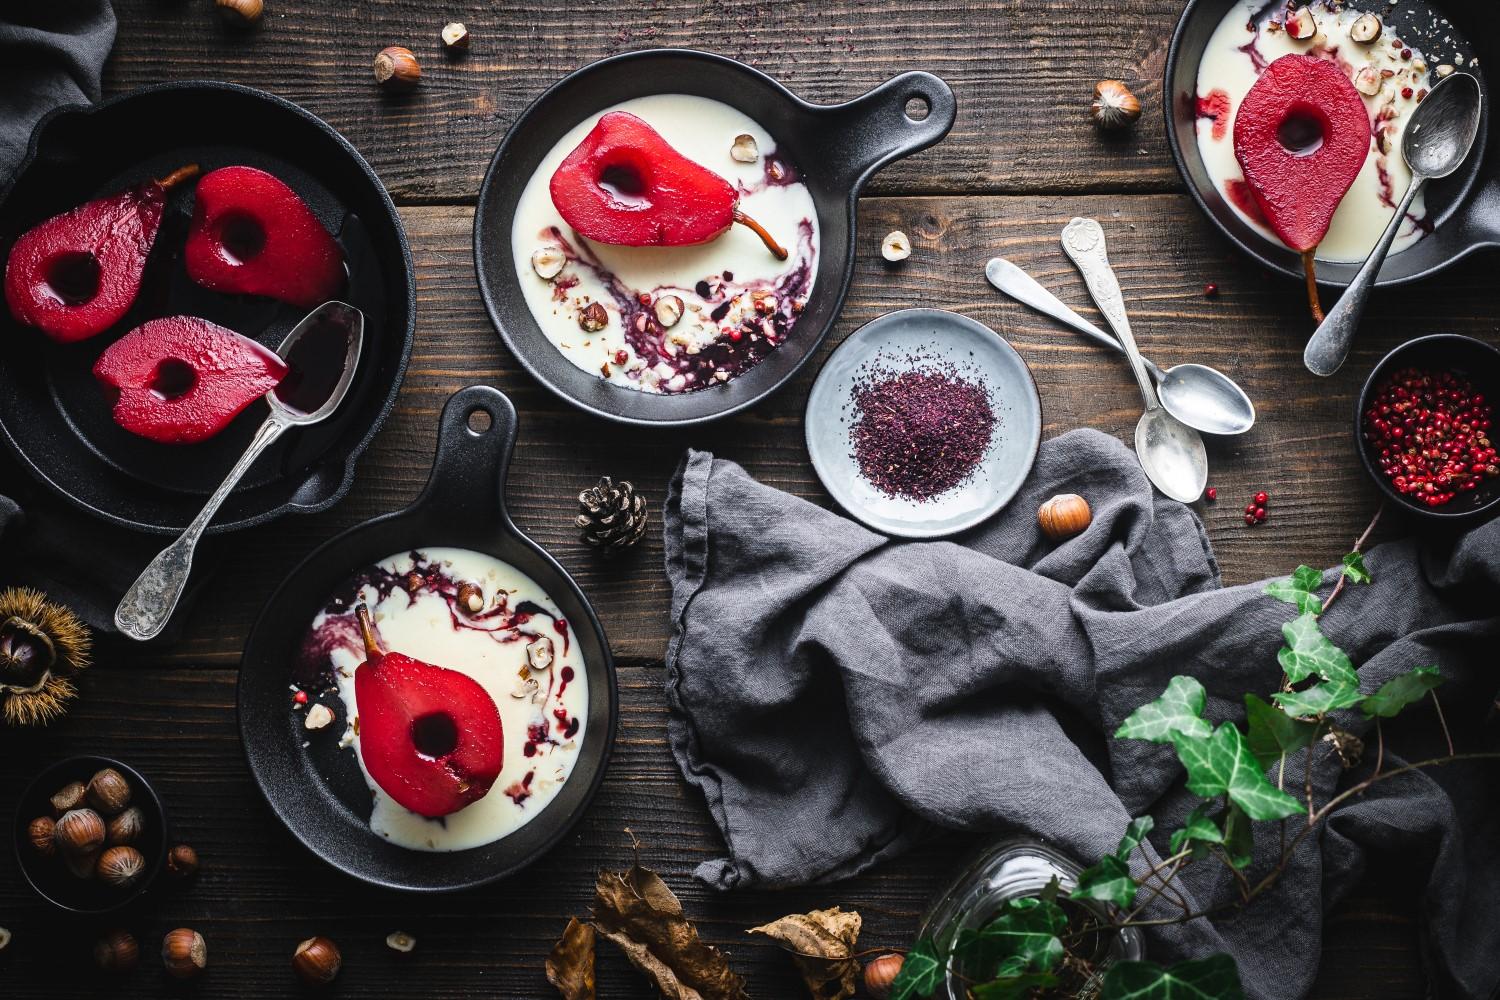 An easy but really fancy dessert like this hibiscus poached pears with vanilla and pink peppercorns is guaranteed to amaze at any party!